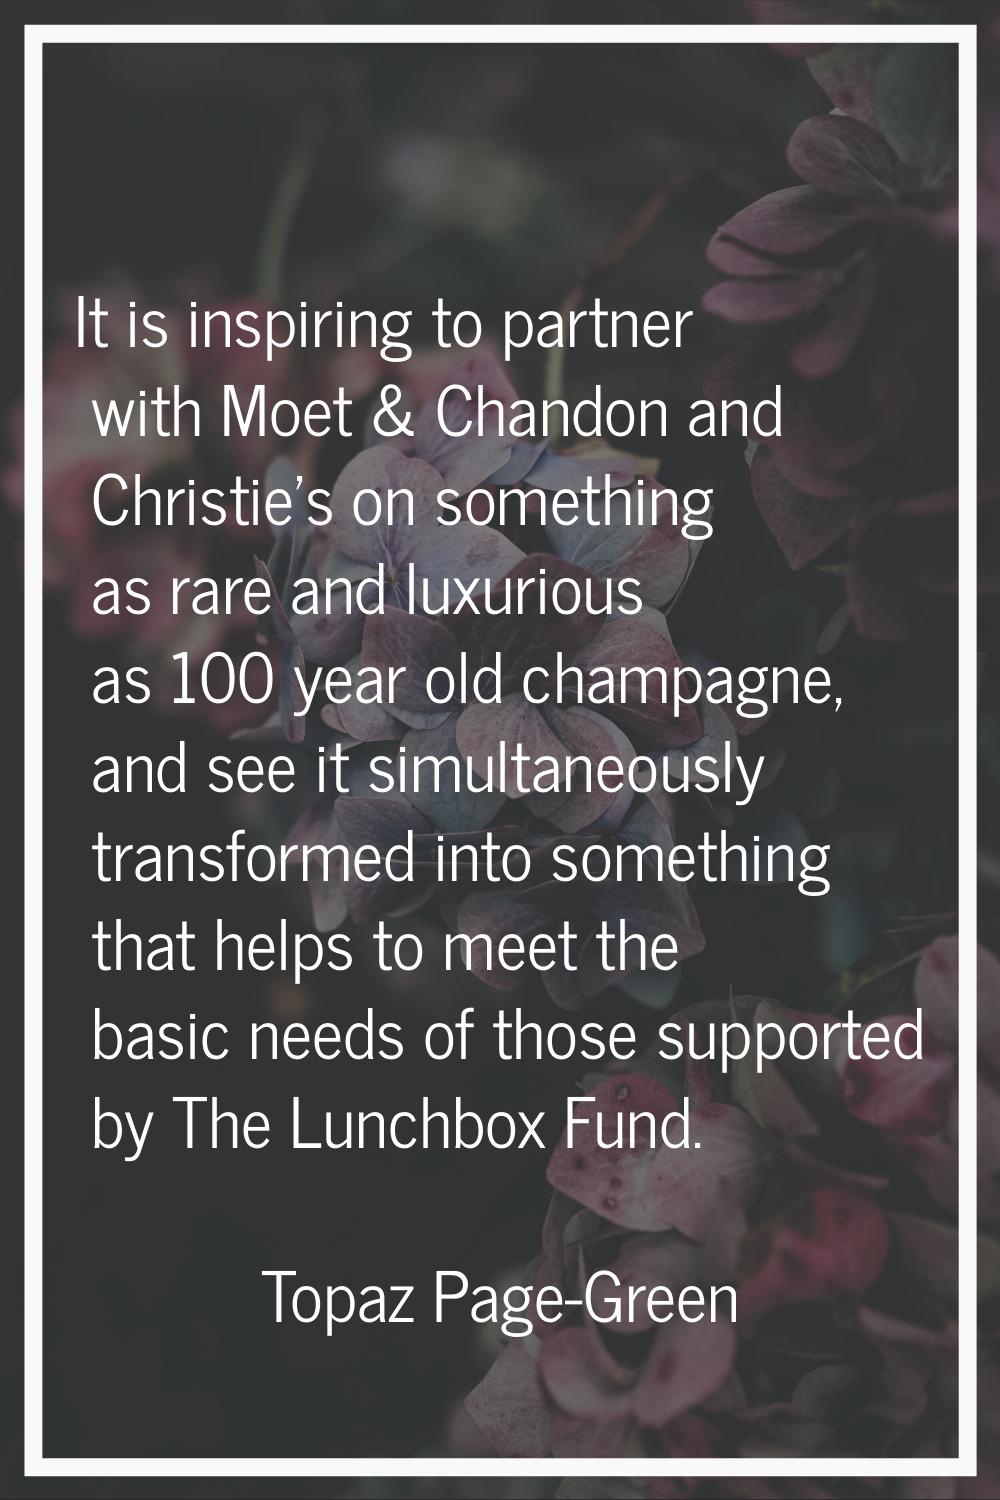 It is inspiring to partner with Moet & Chandon and Christie's on something as rare and luxurious as